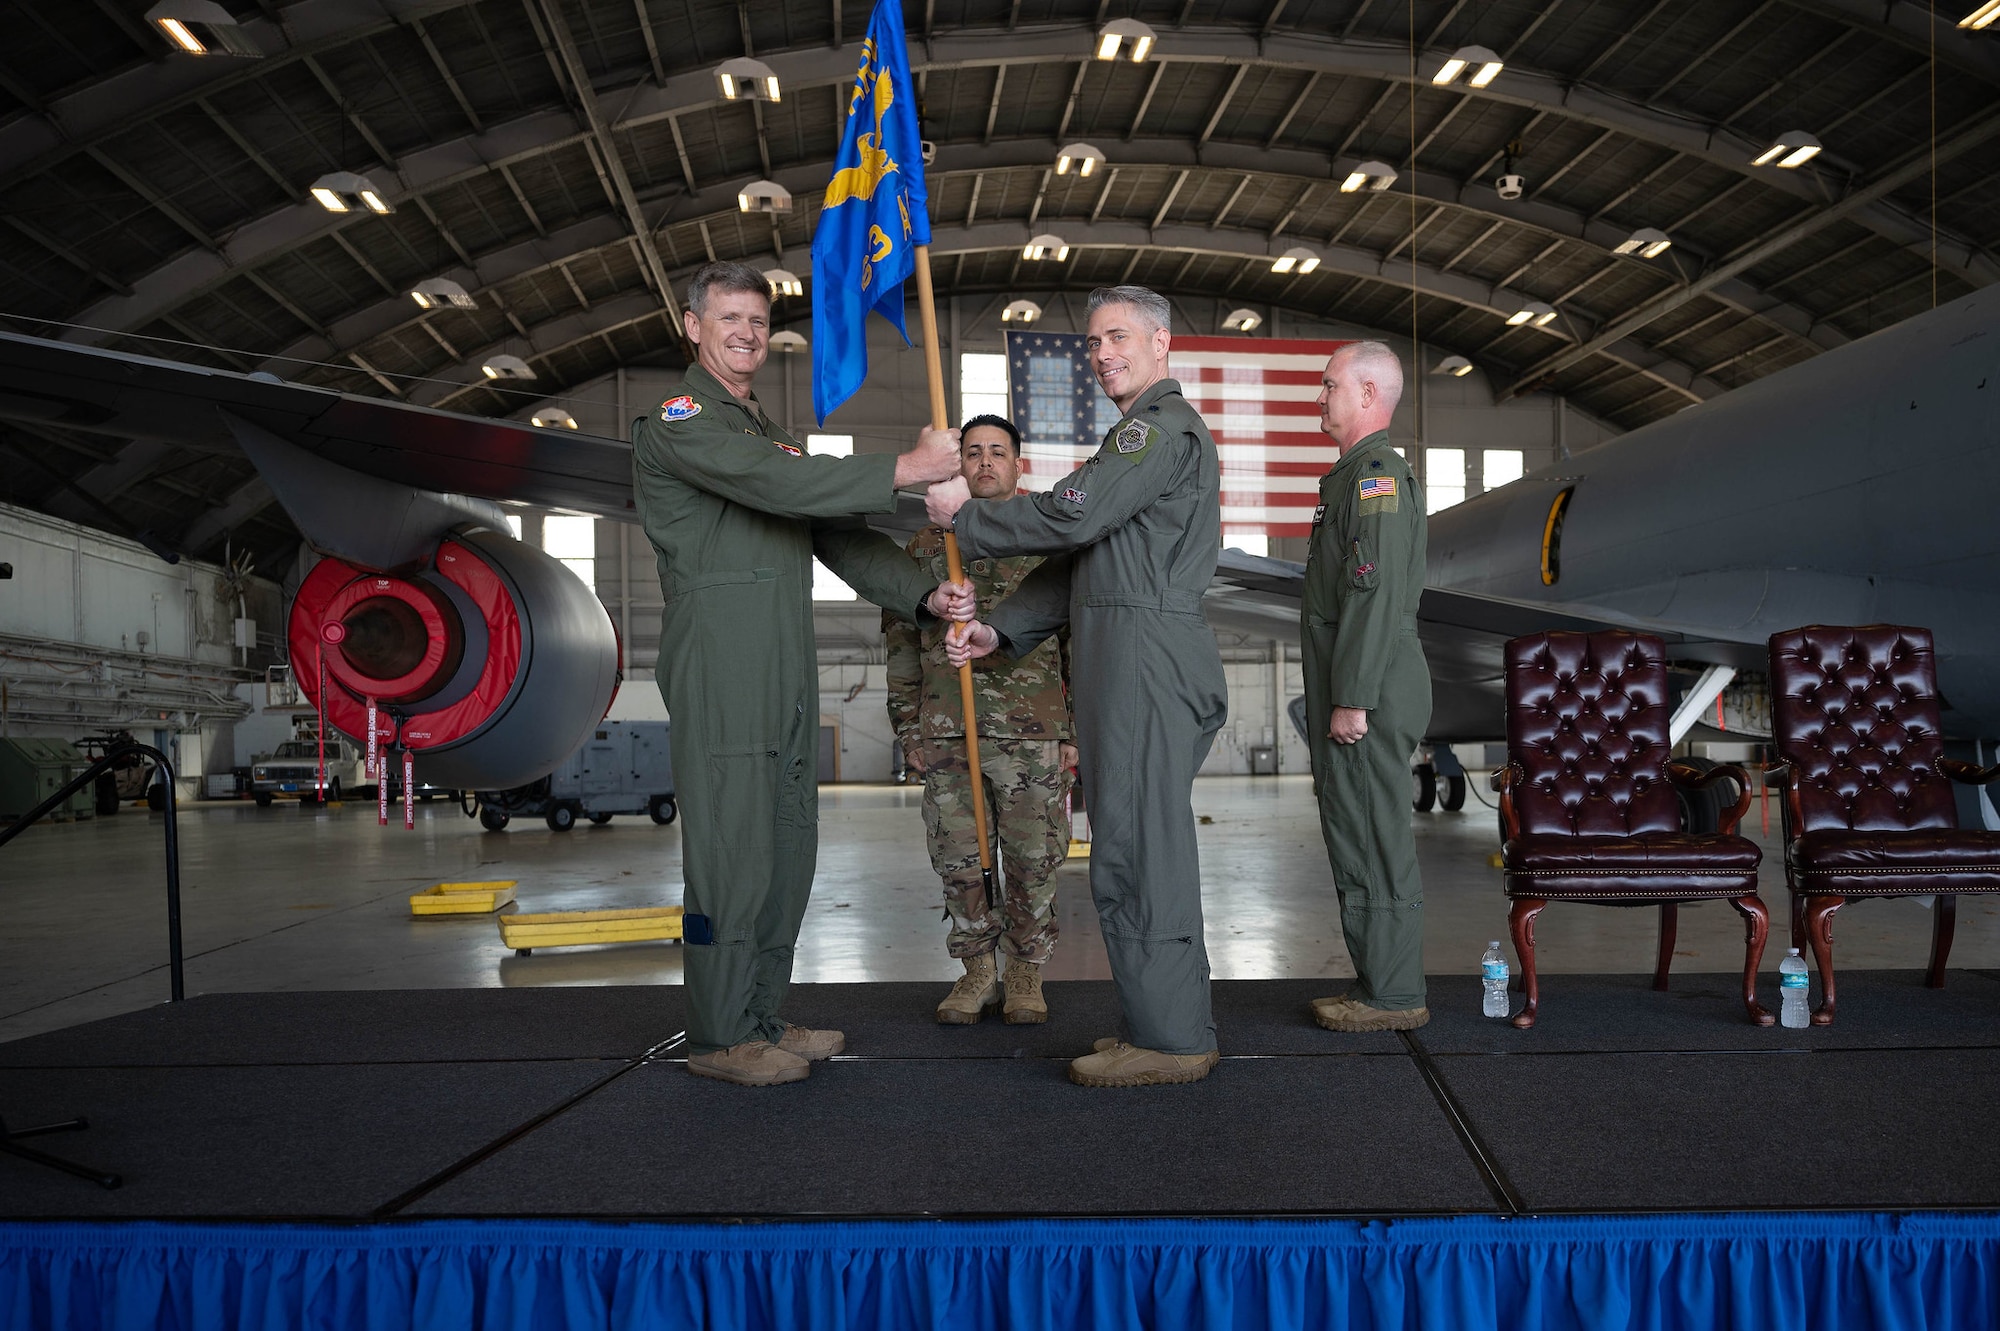 The 63rd Air Refueling Squadron, MacDill Air Force Base, Fla., welcomed their new commander, Lt. Col. Matthew Swee, during a ceremony here, March 3, 2024.